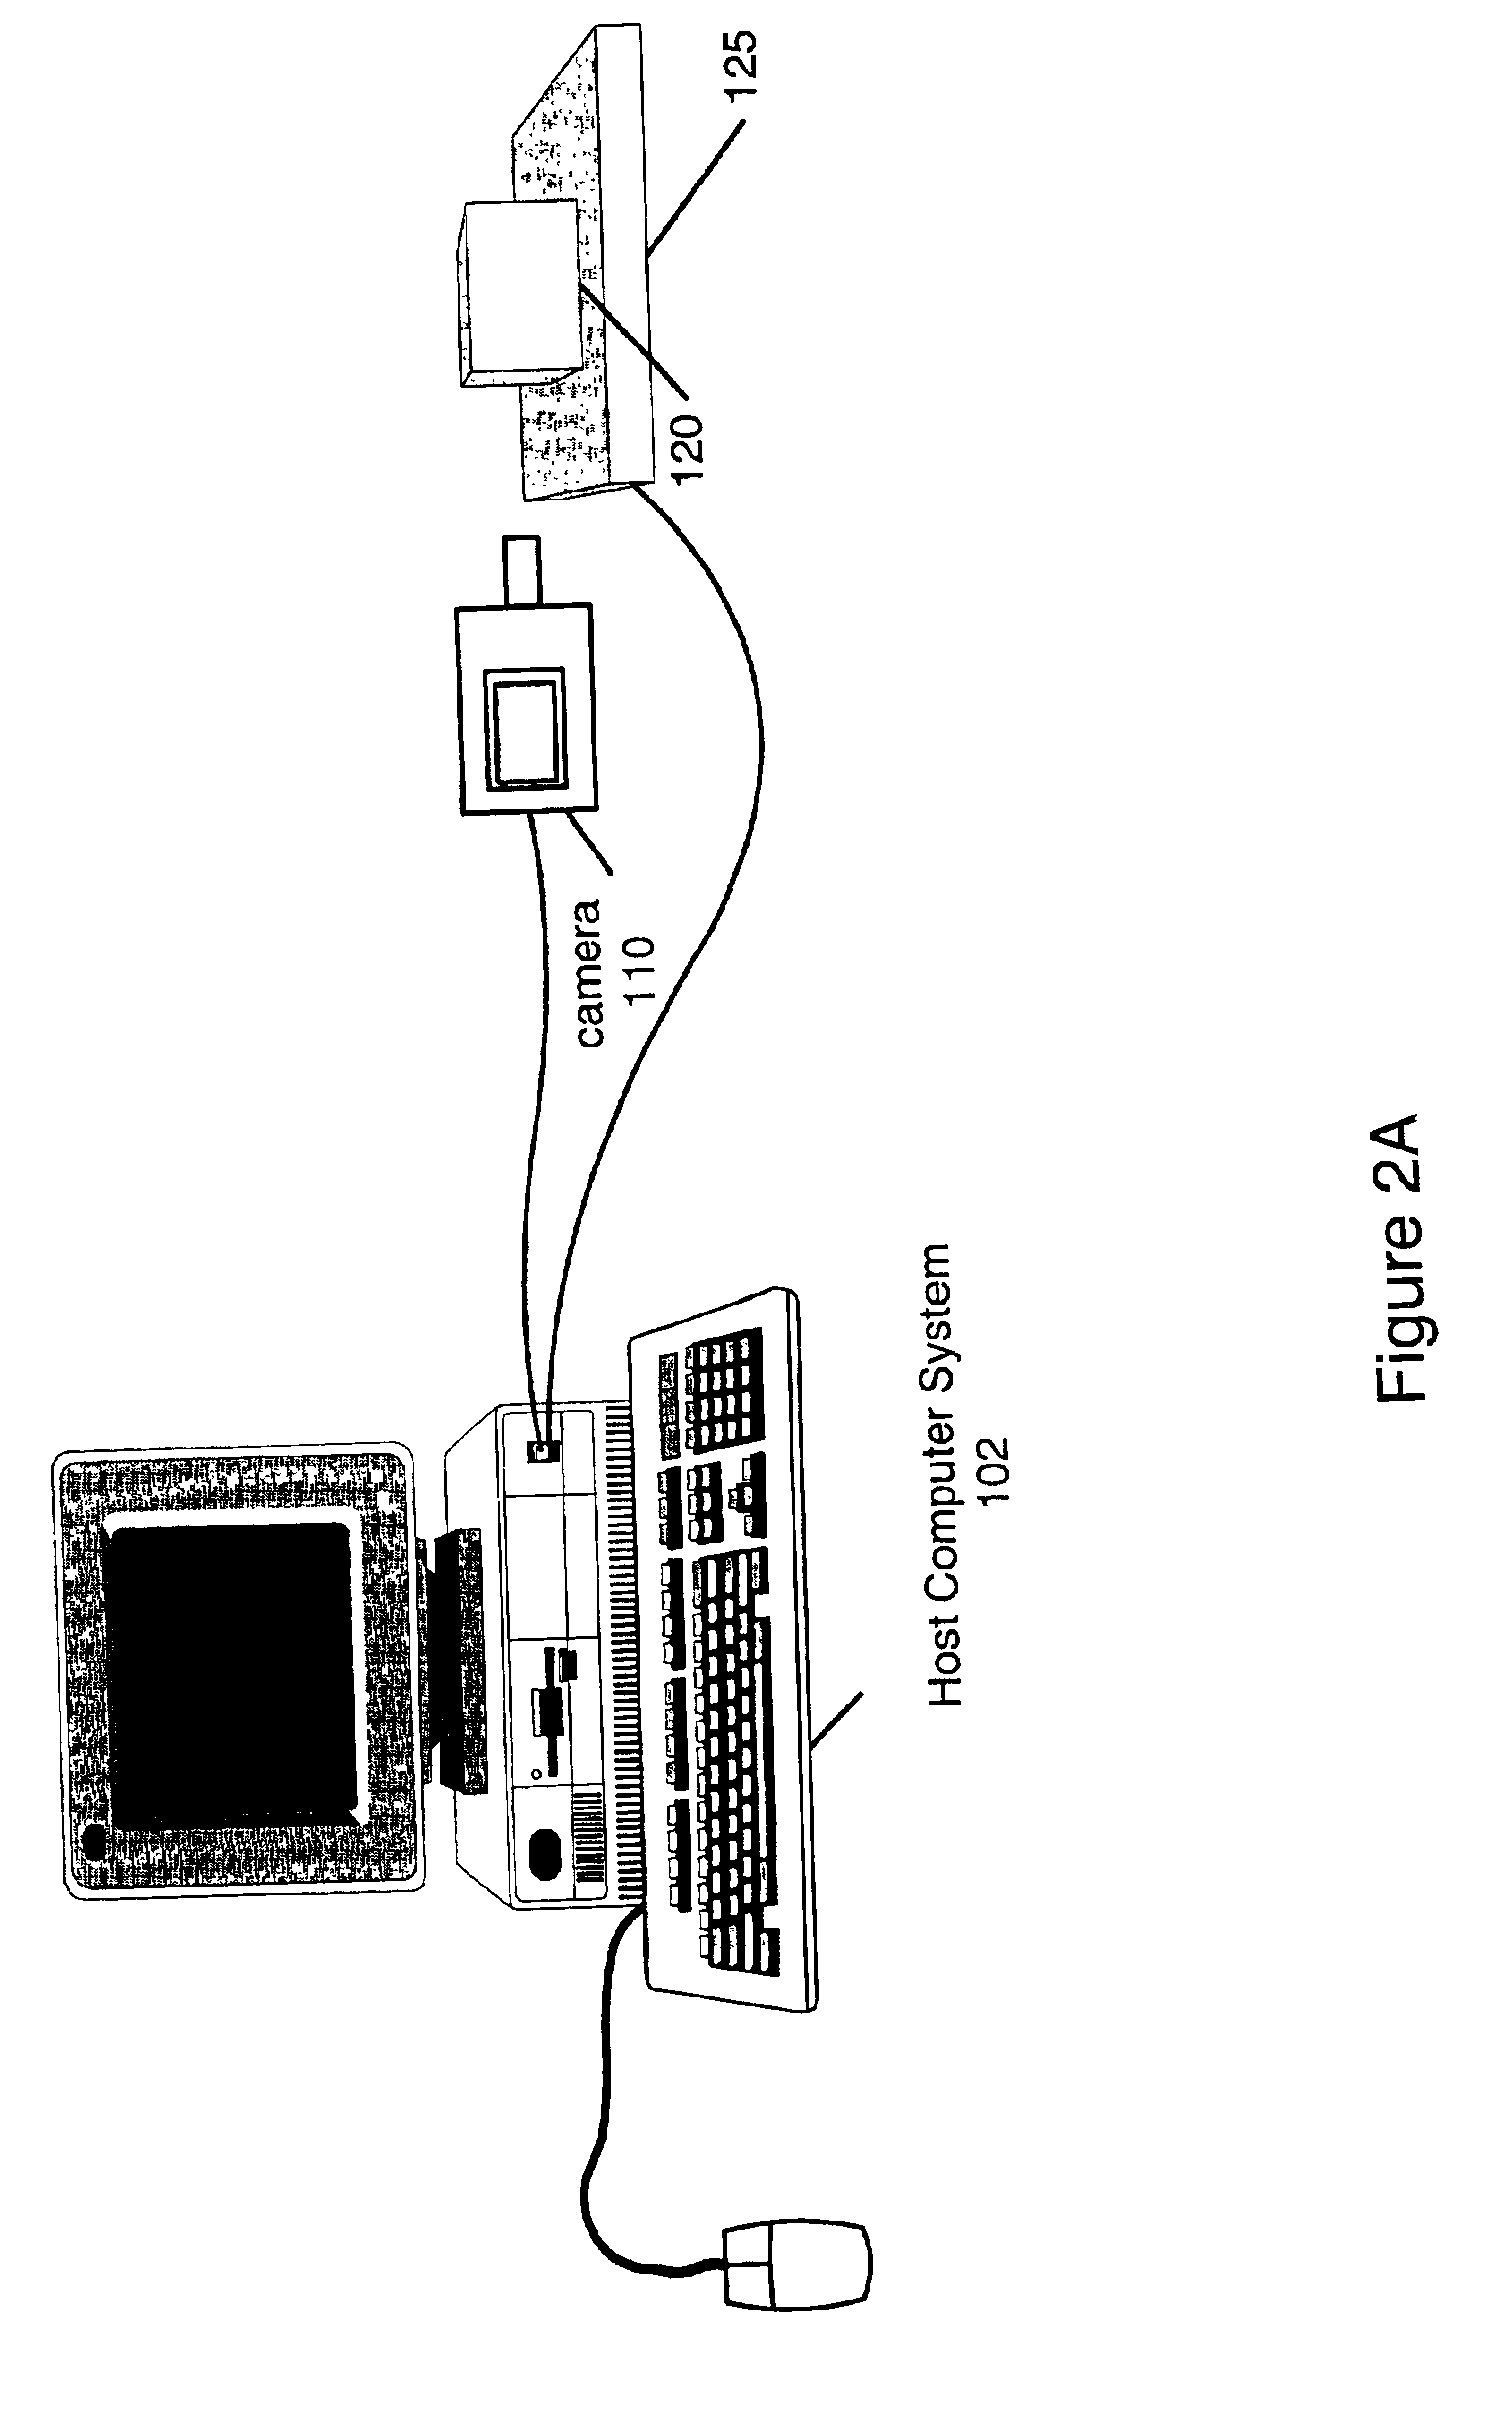 System and method for generating a low discrepancy curve in a region